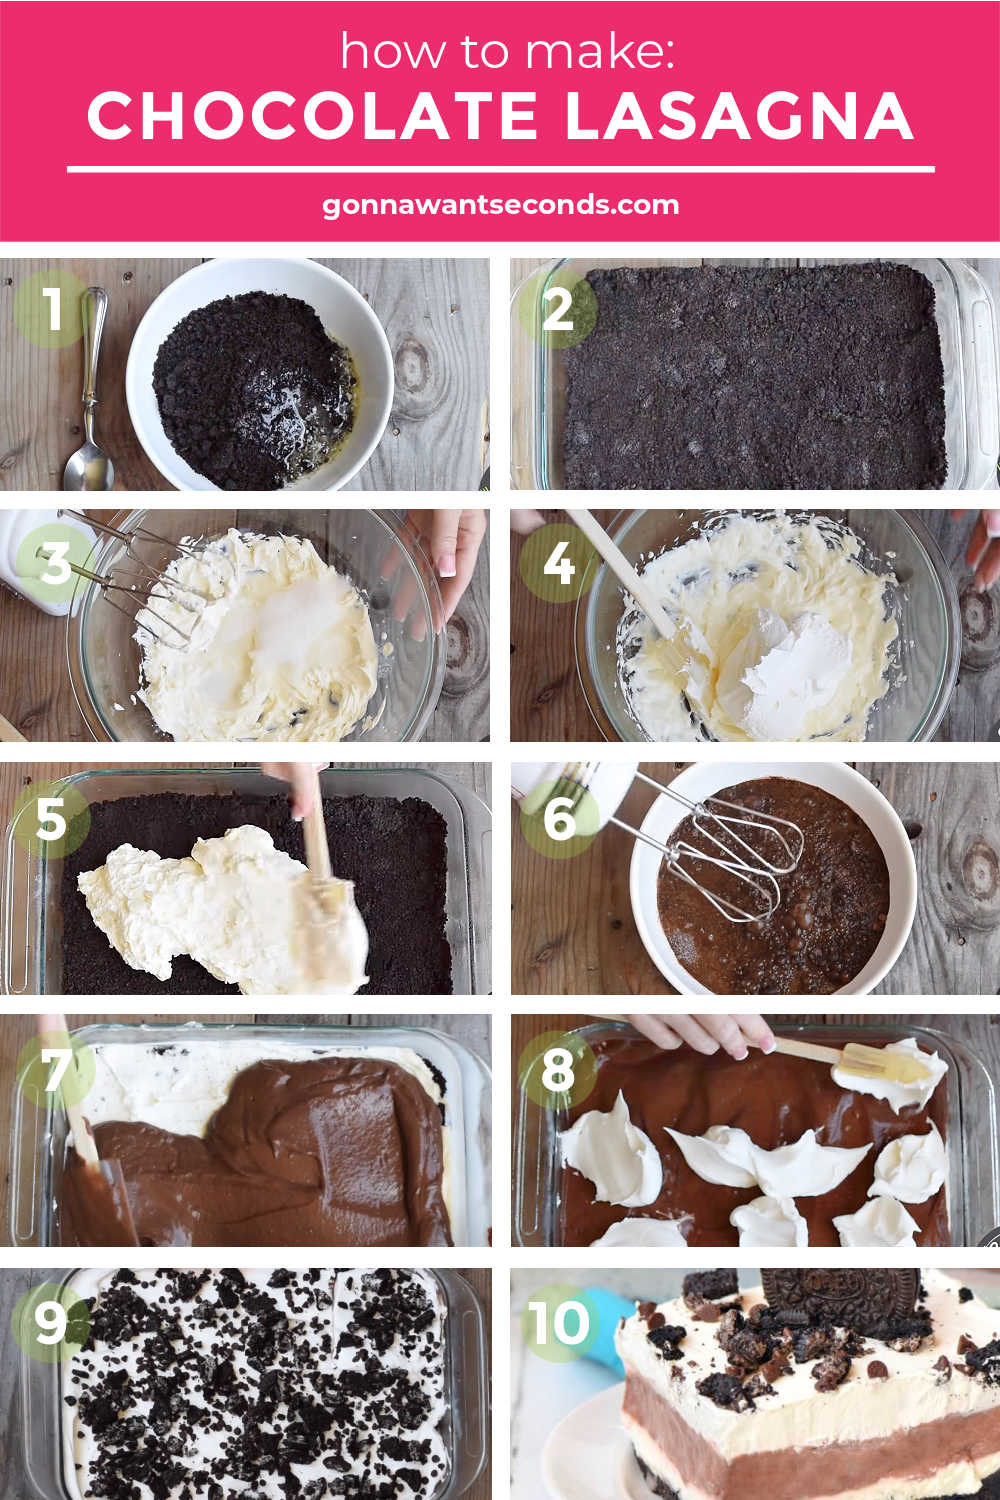 step by step how to make chocolate lasagna